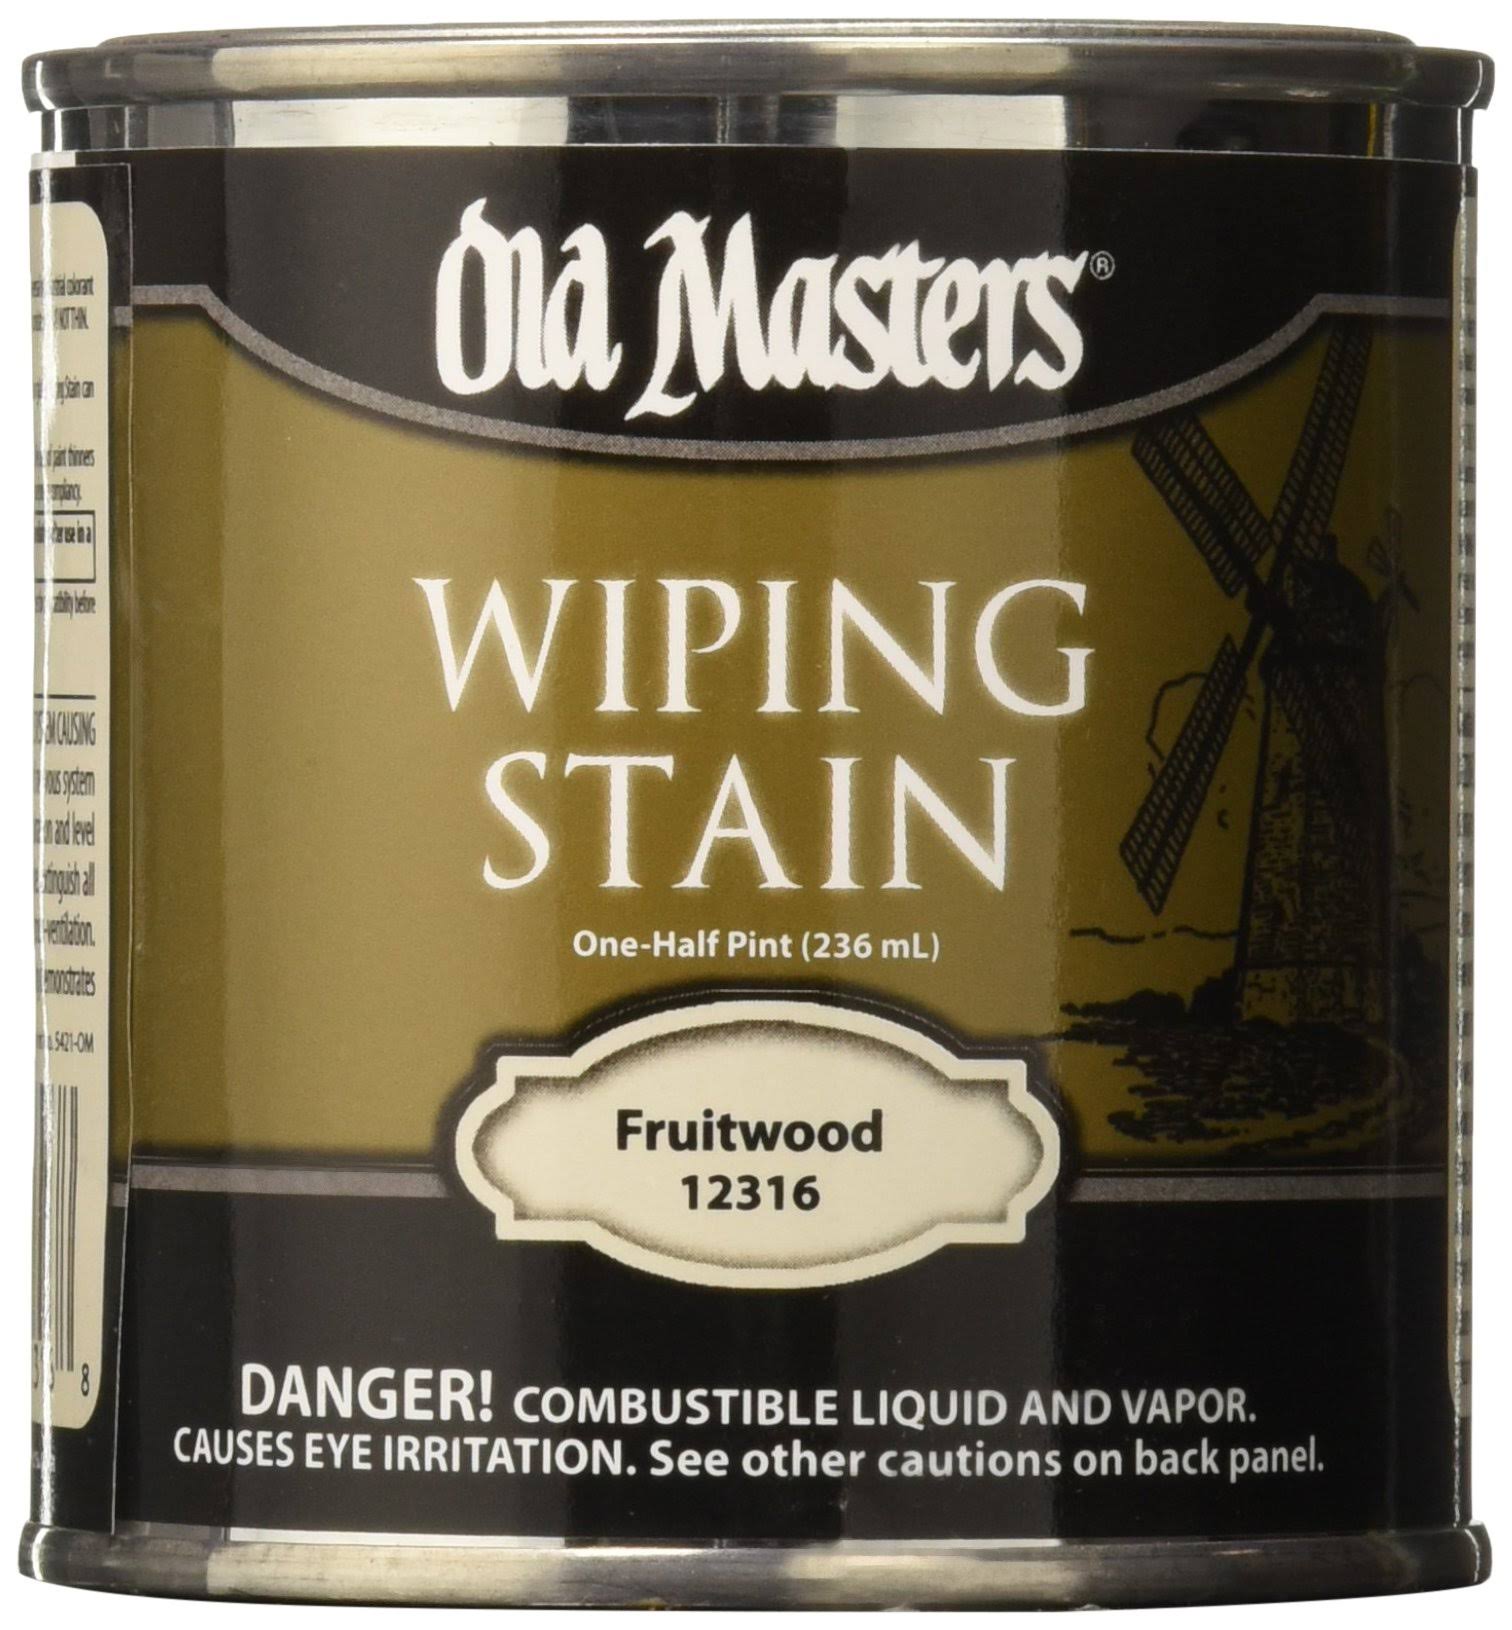 Old Masters Wiping Stain - 1/2 Pint, Fruitwood